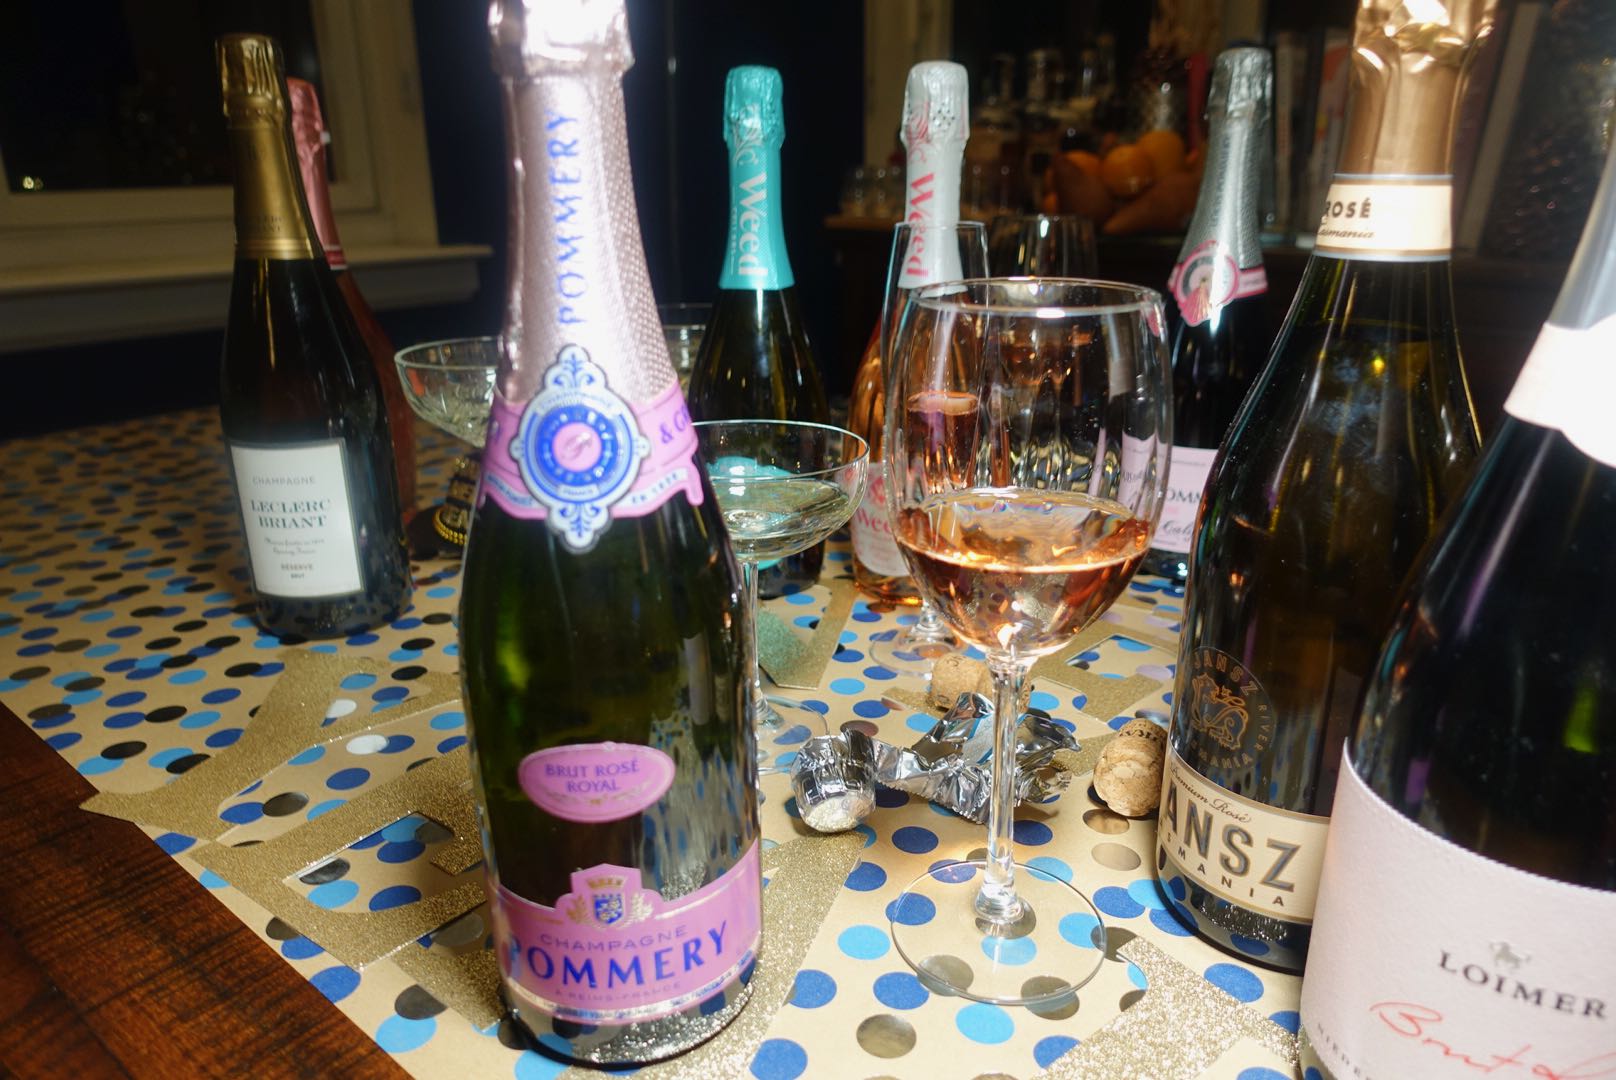 JANSZ Tasmania Premium Rosé NV The Best Bubbly For New Year's Eve